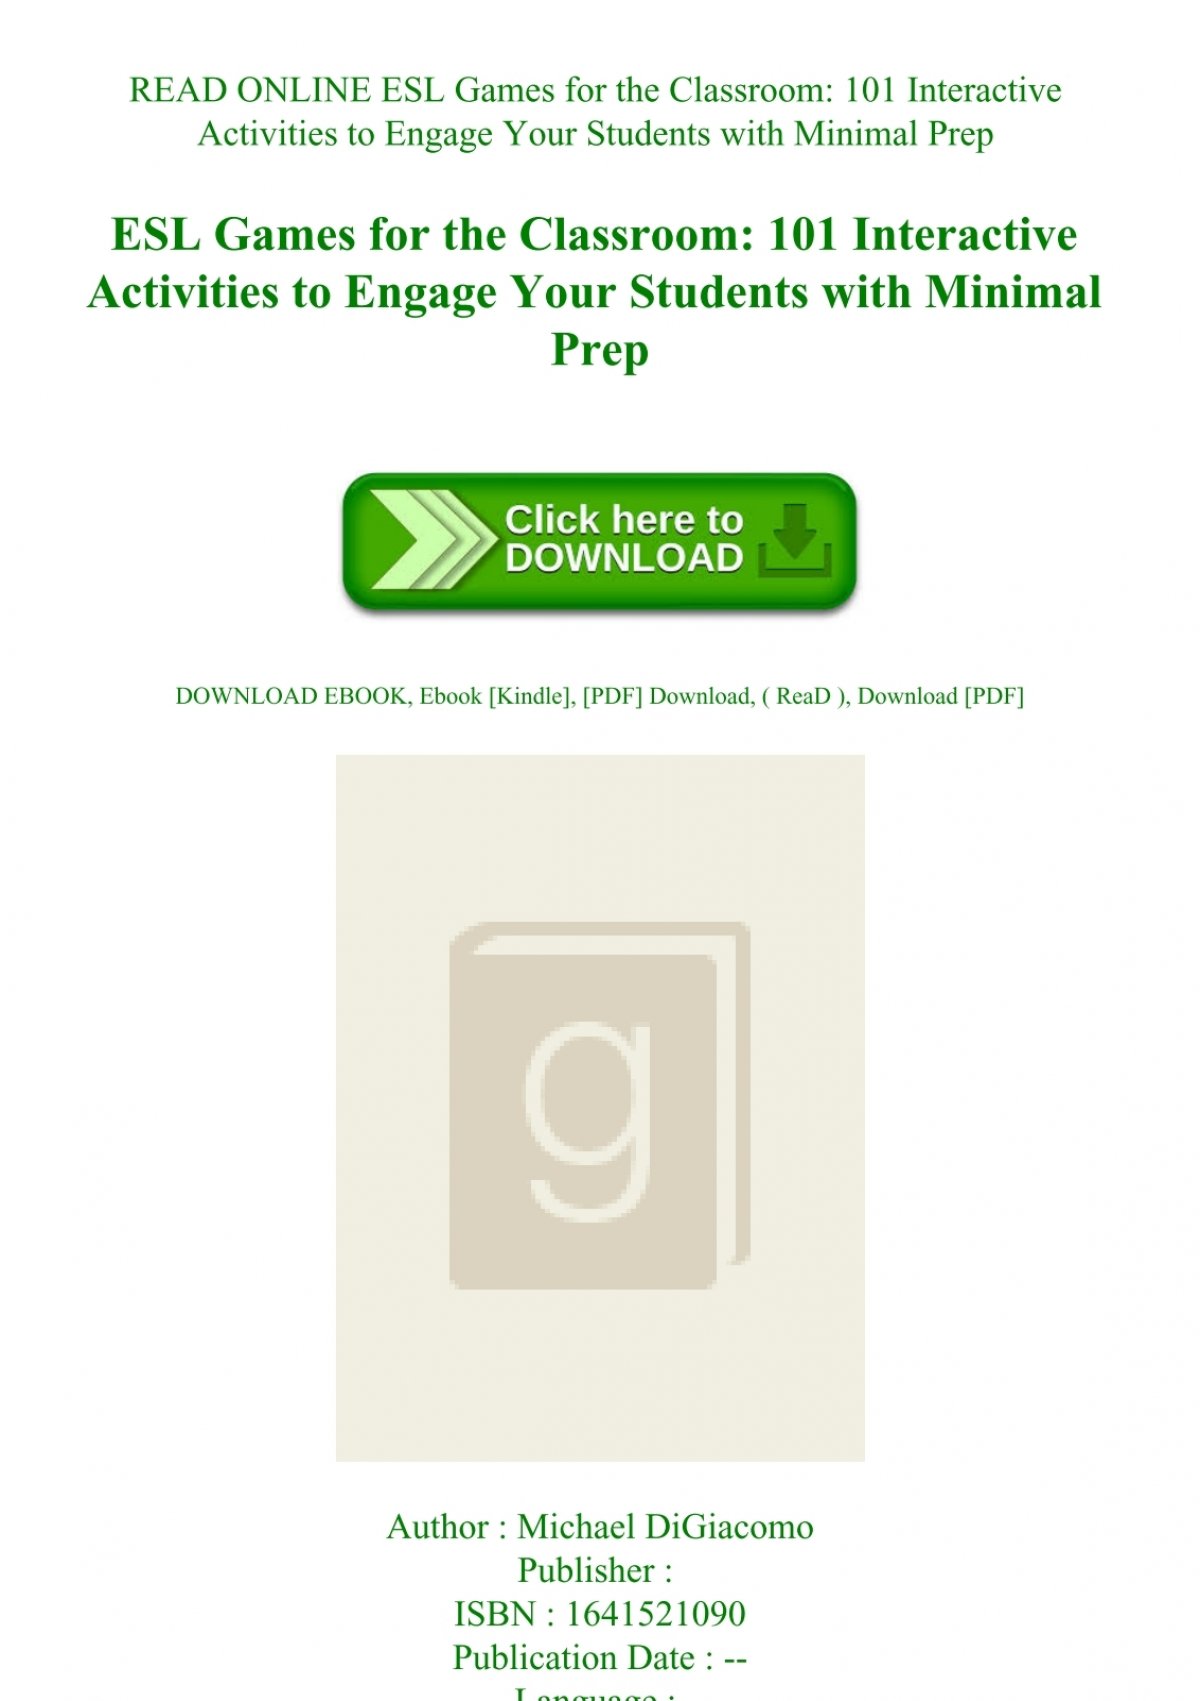 read-online-esl-games-for-the-classroom-101-interactive-activities-to-engage-your-students-with-mini